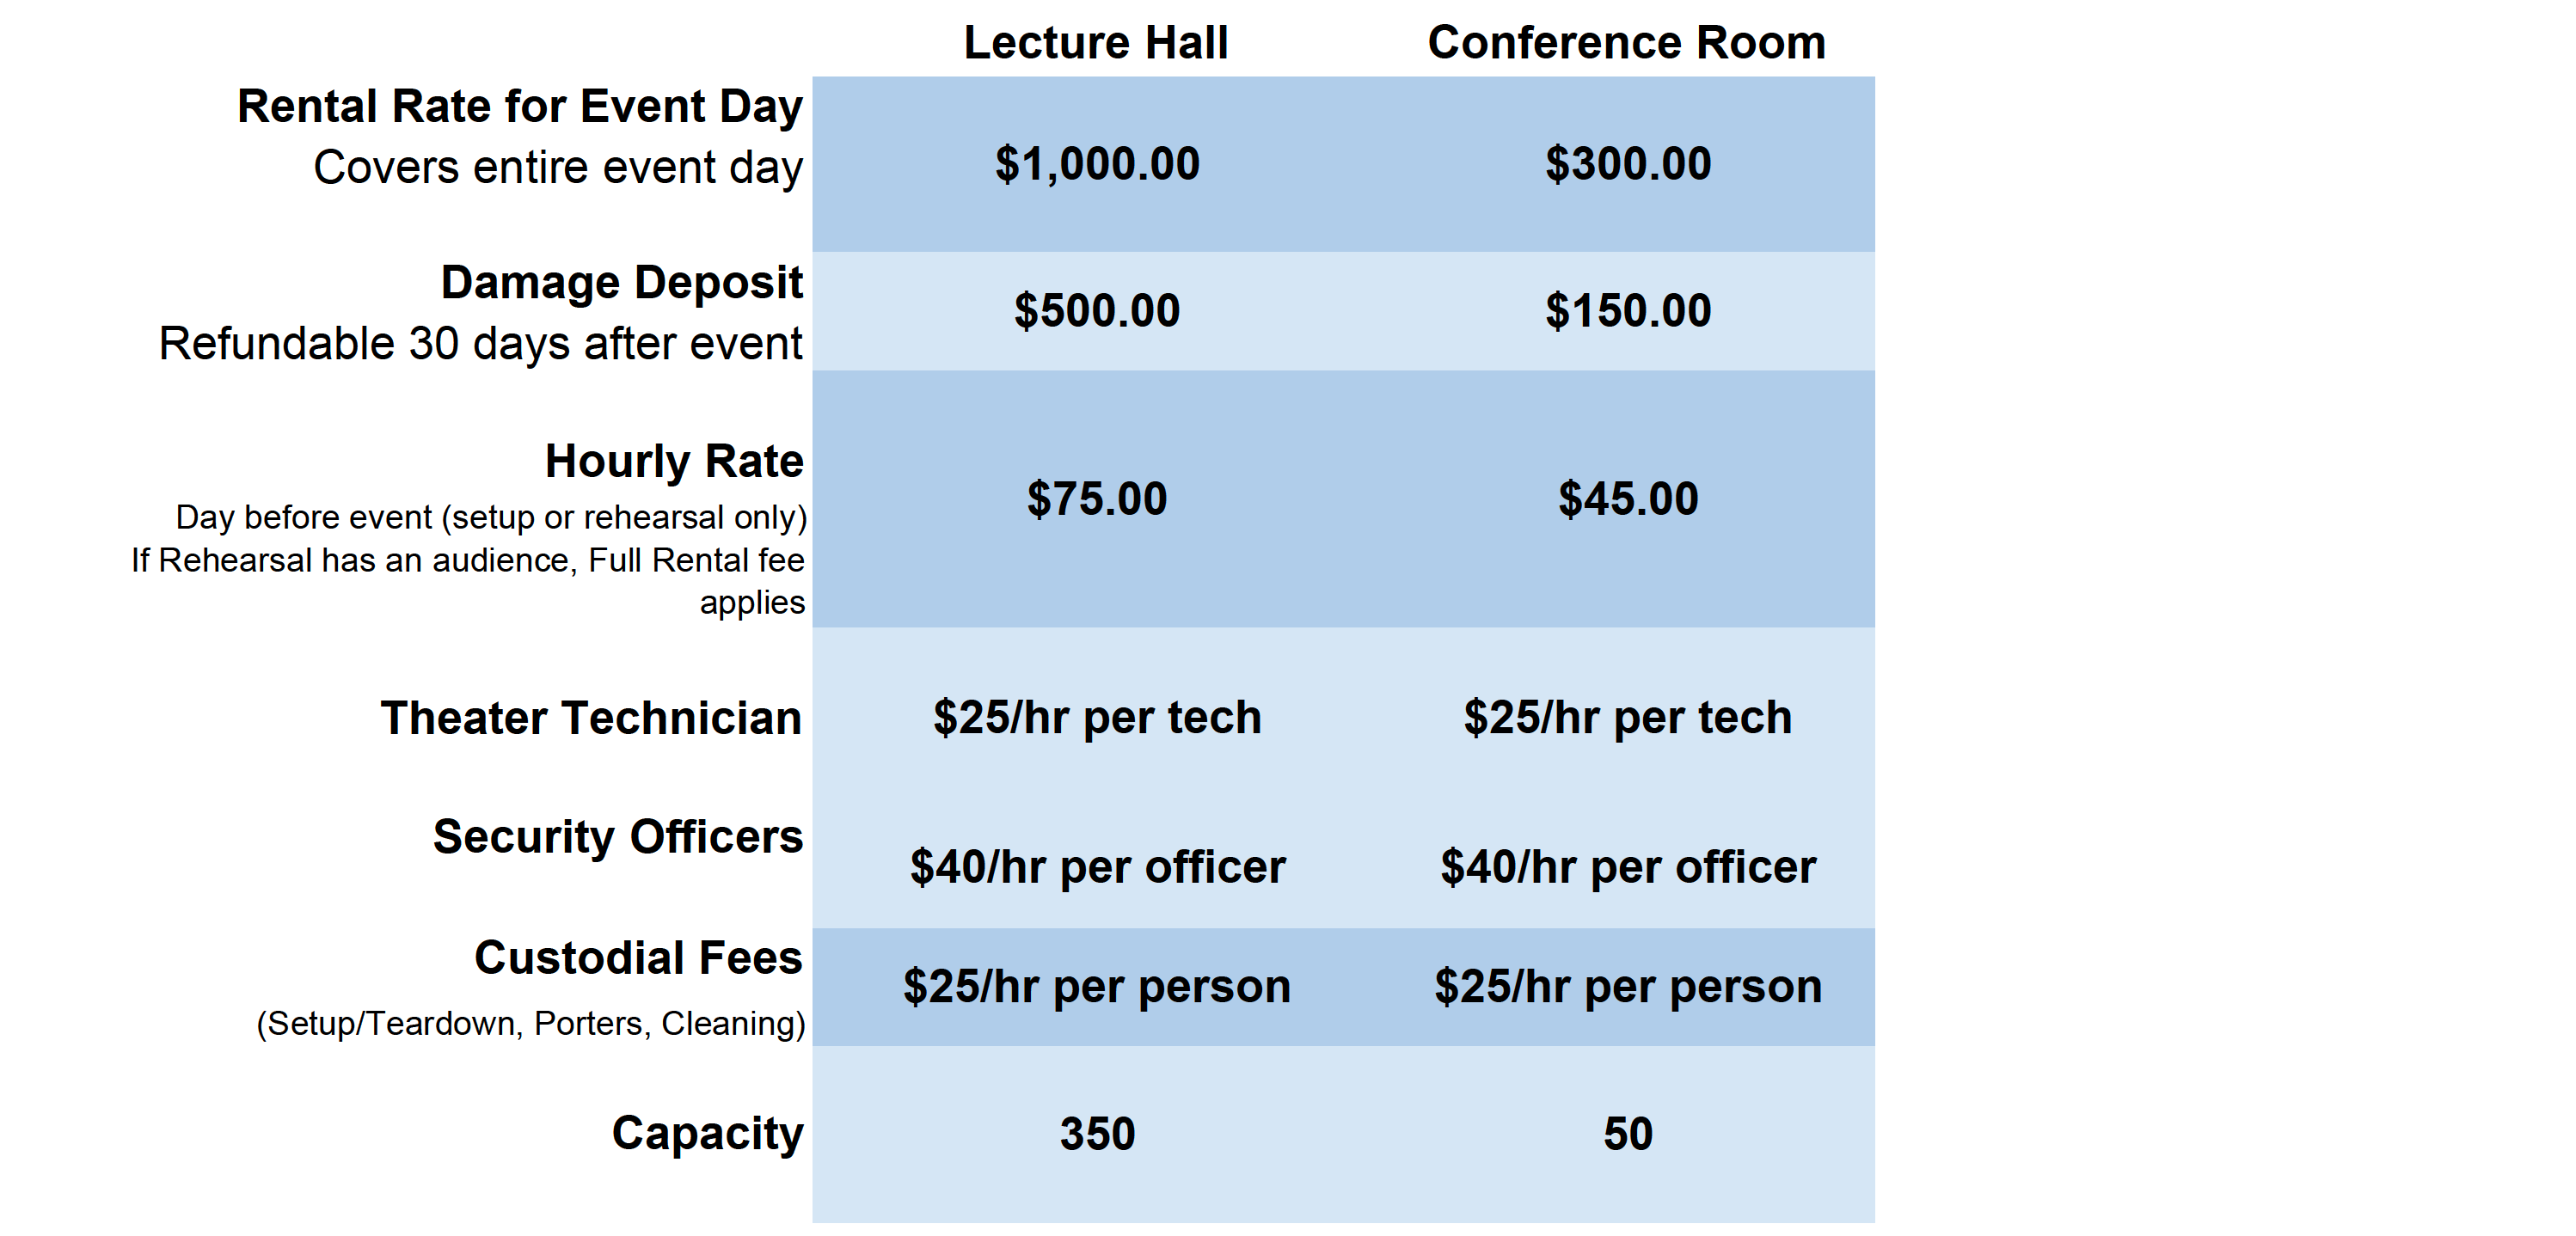 SetB Lecture Hall Rates